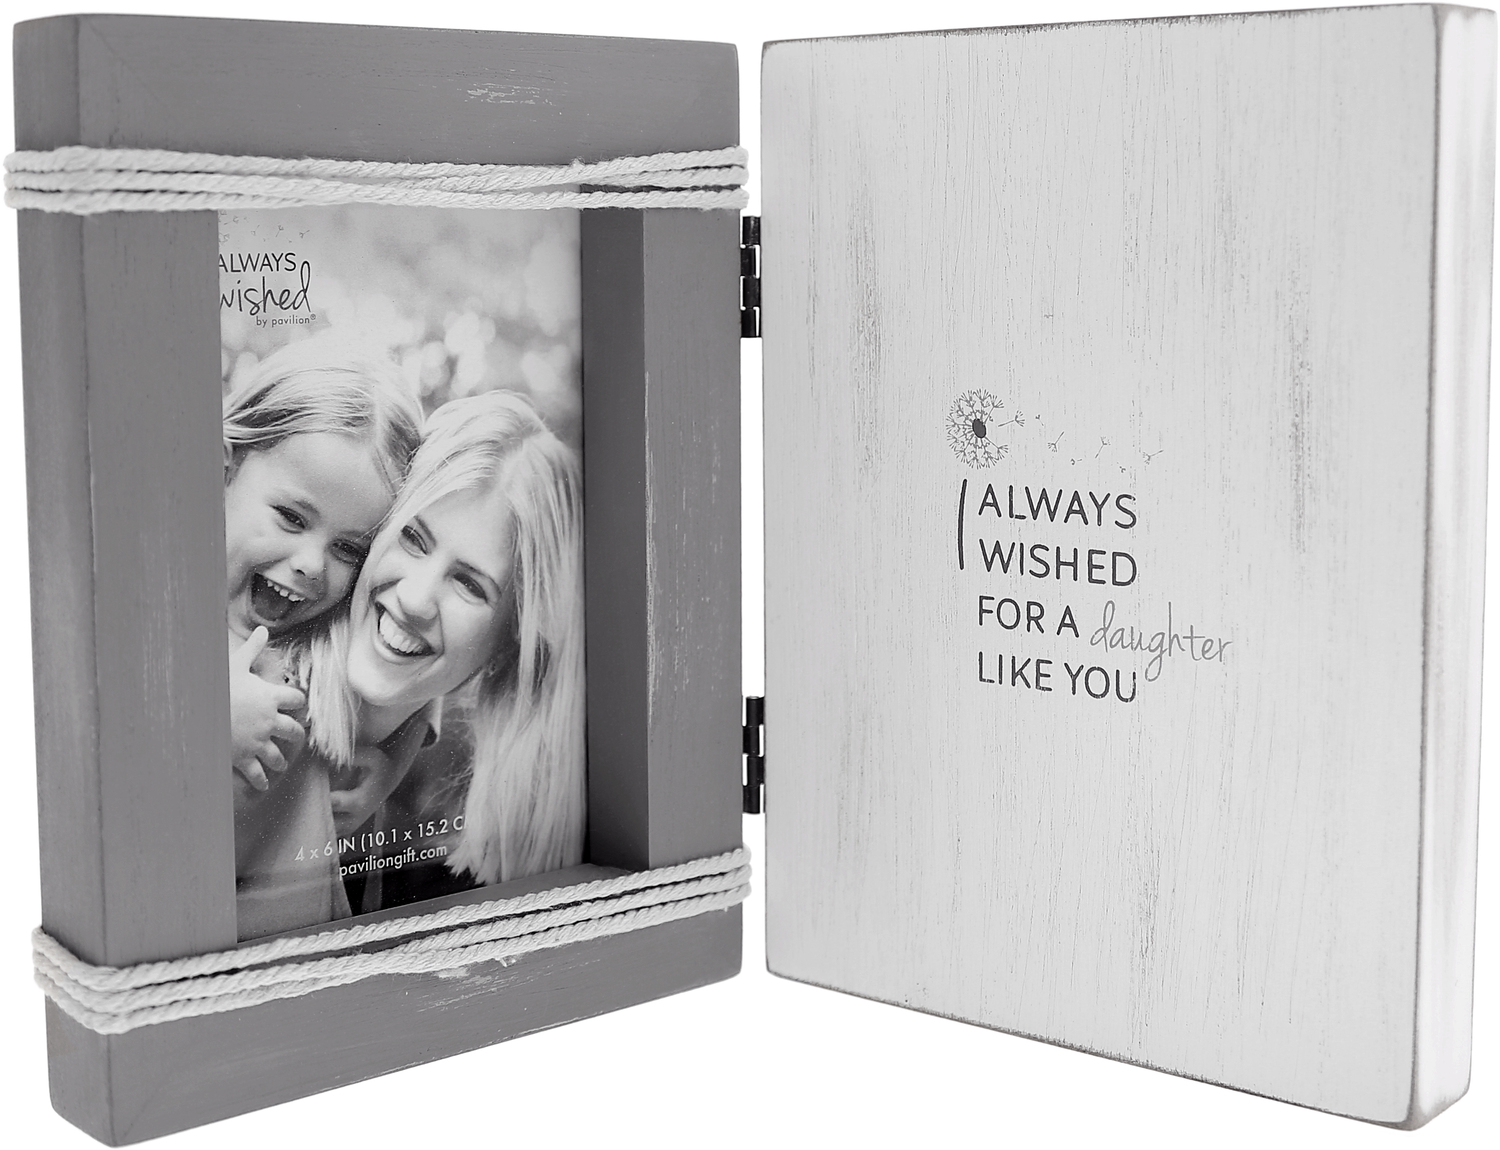 Daughter Like You by I Always Wished - Daughter Like You - 5.5" x 7.5" Hinged Sentiment Frame (Holds 4" x 6" Photo)